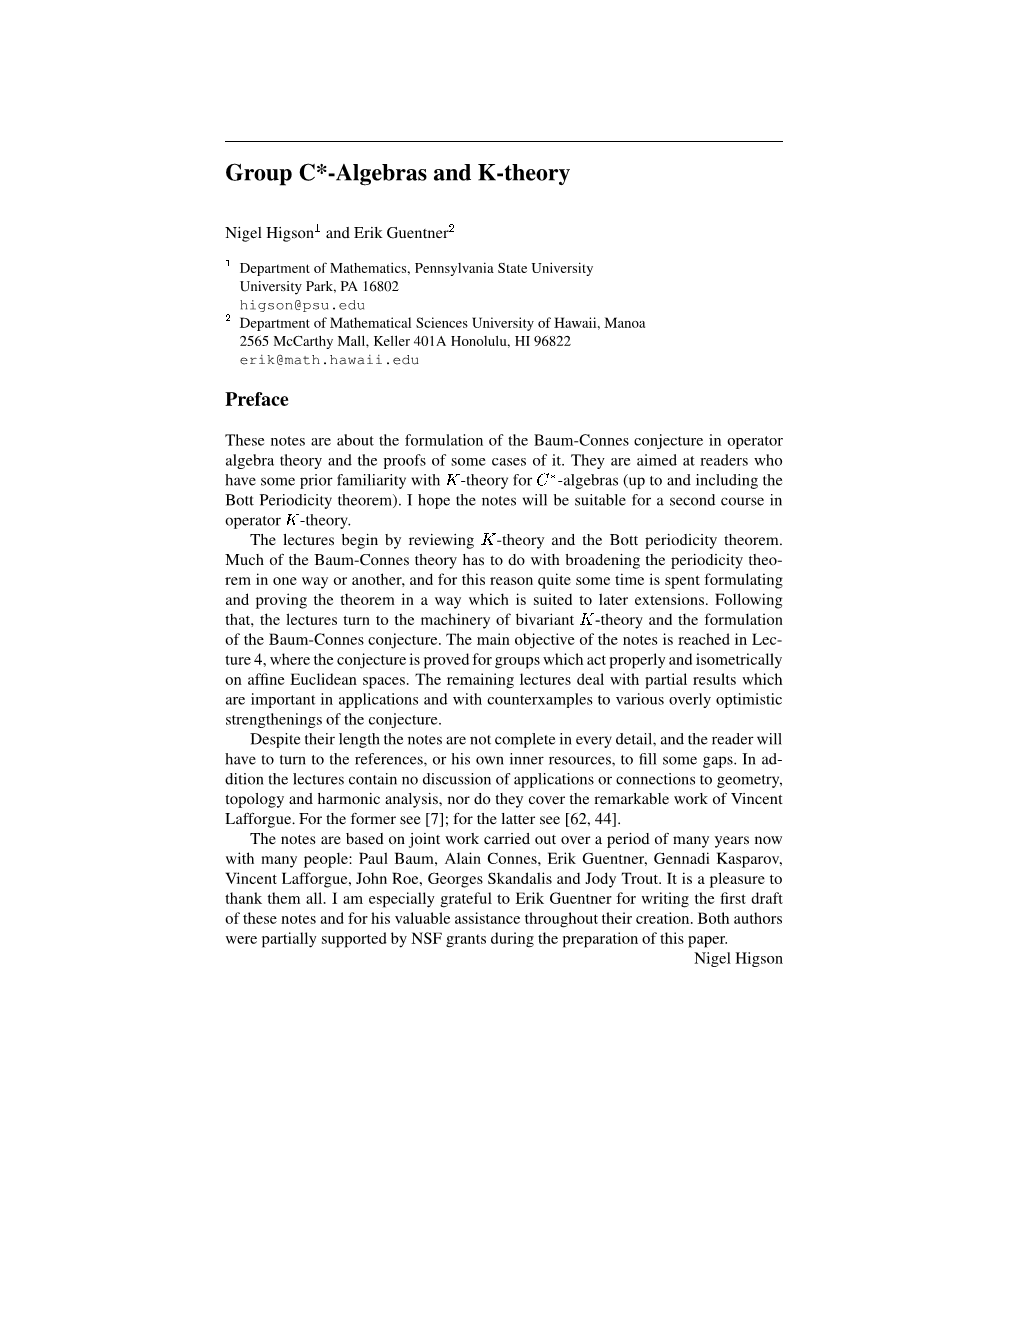 Group C*-Algebras and K-Theory